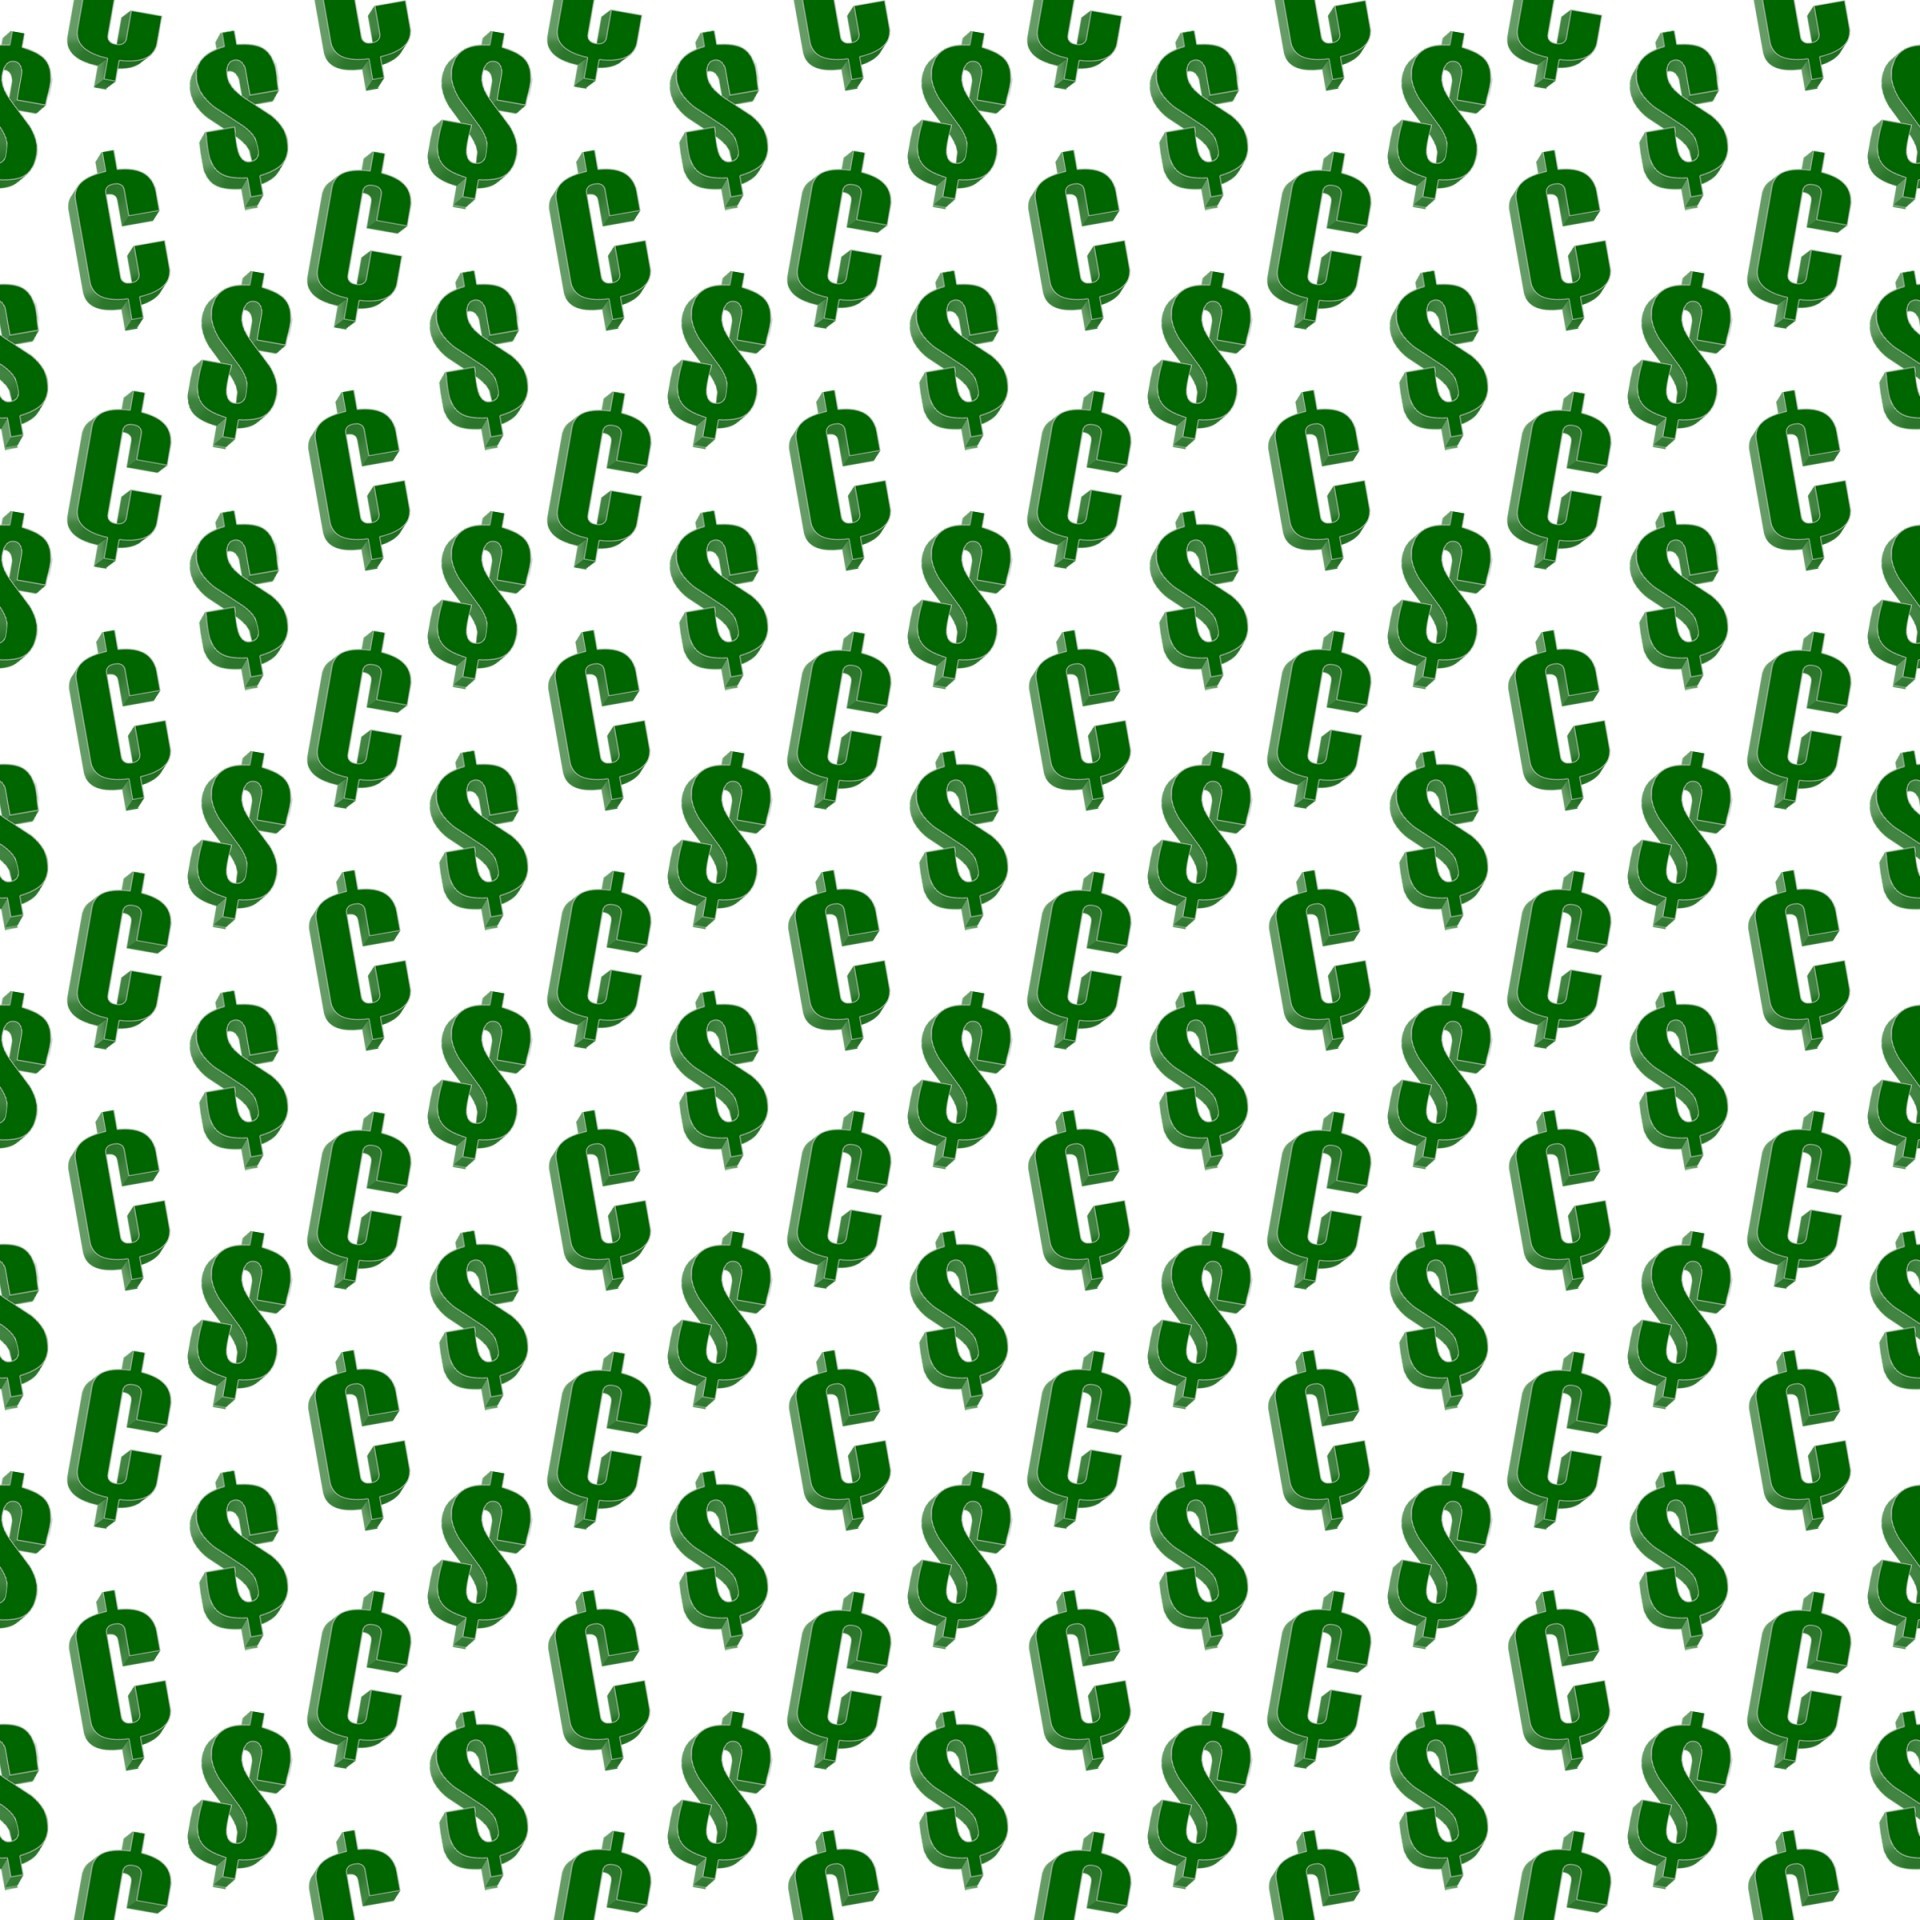 1920x1920 Dollars And Cents Repeating Pattern Gothic Style Dollar Sign ...